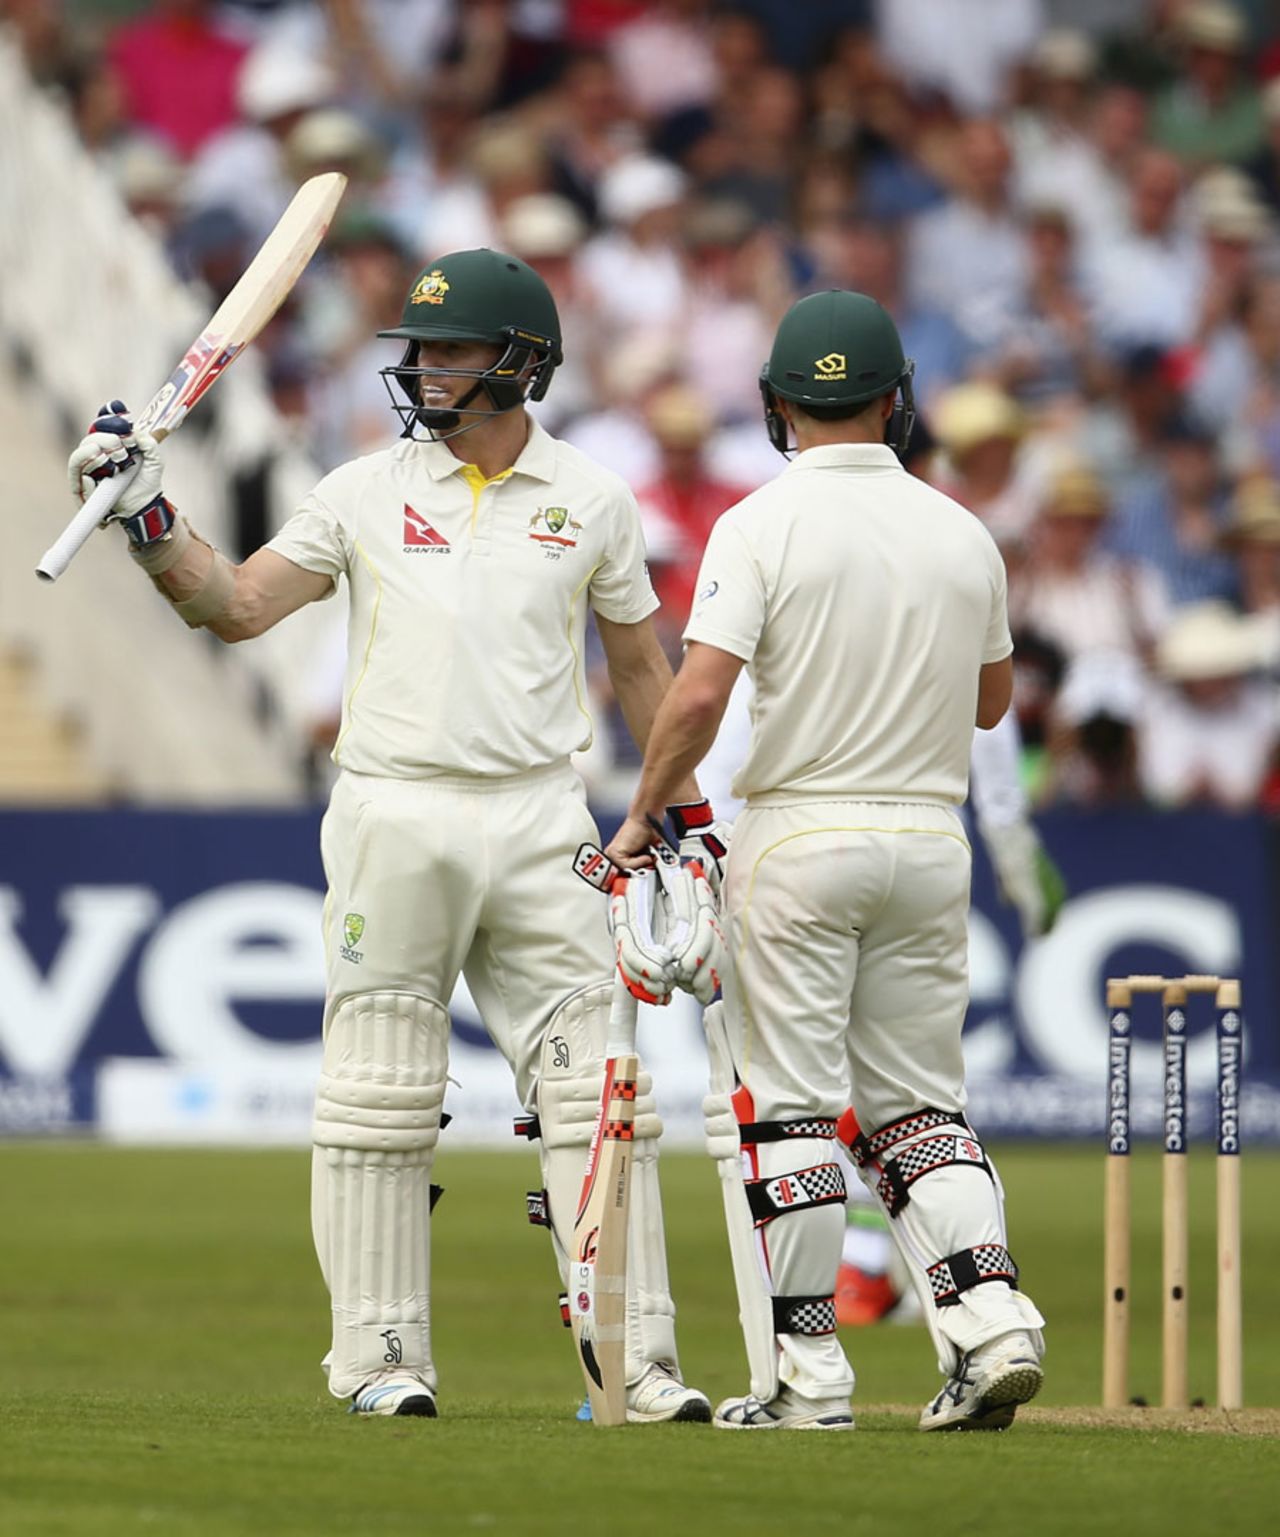 Chris Rogers notched another half-centuryChris Rogers notched fifty in a century opening standBridge, 2nd day, August 7, 2015